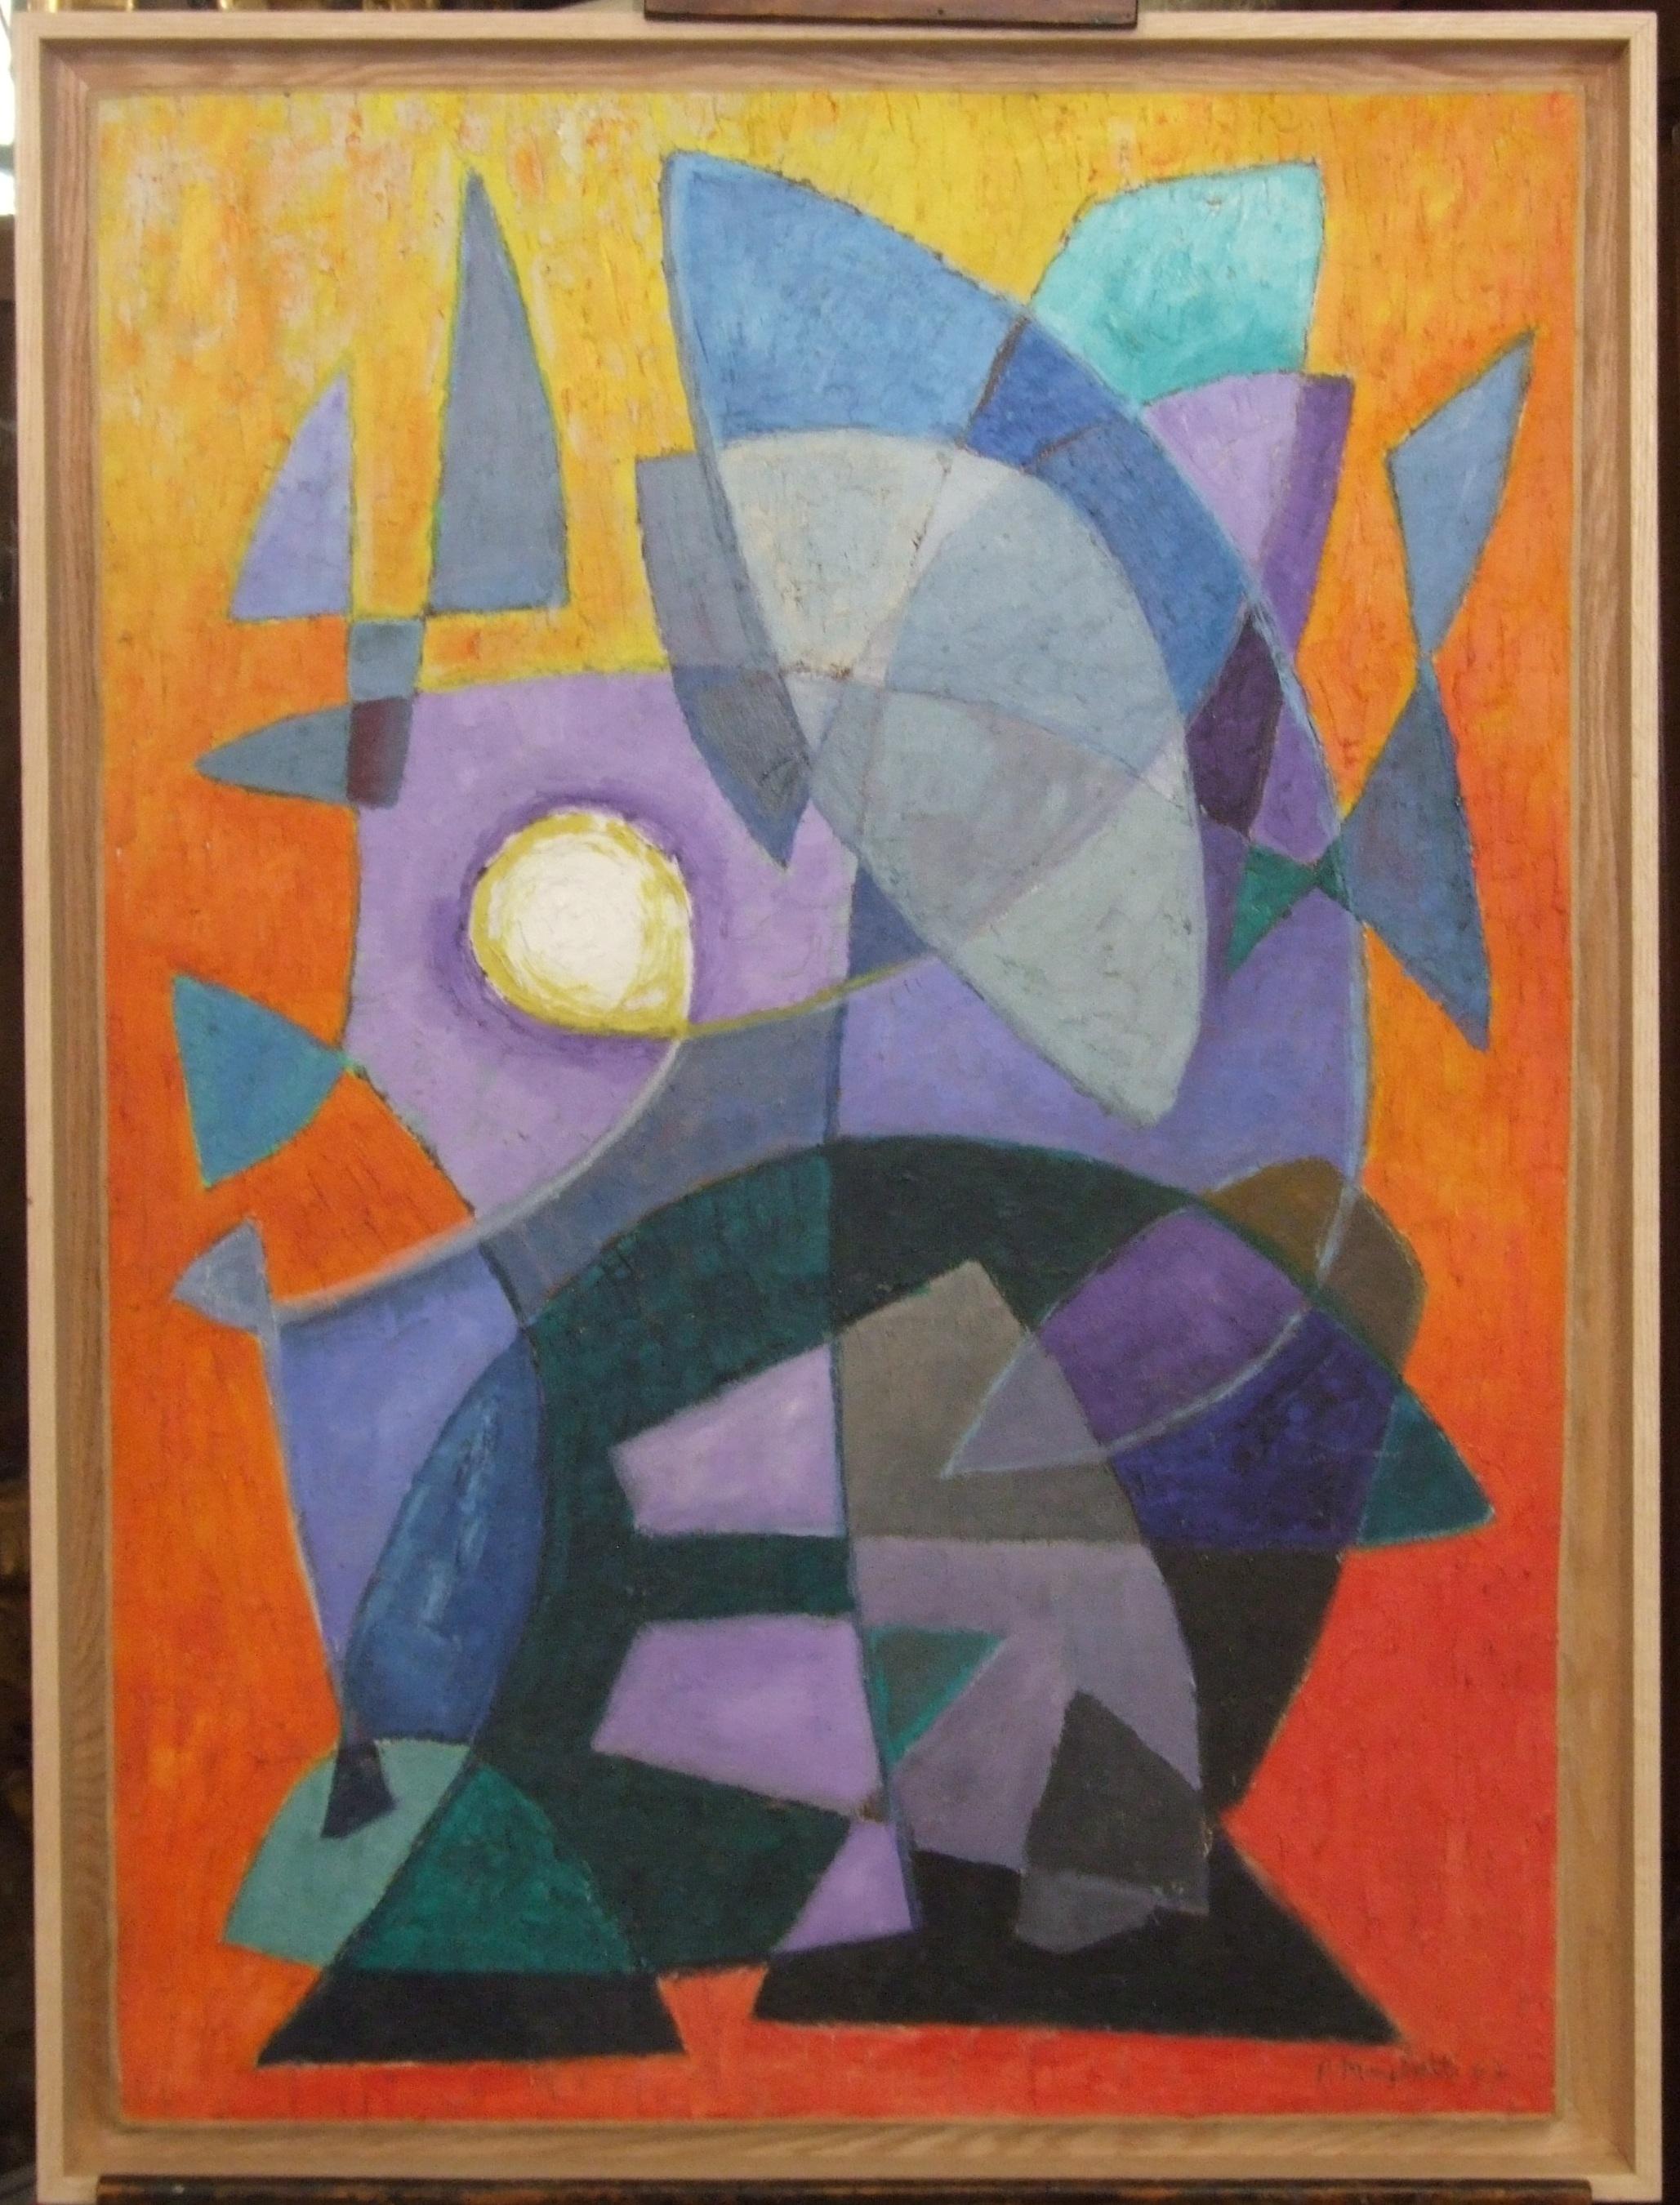 Pierre Marchetti Abstract Painting - Composition A, 1967 - Oil on canvas, 68x56 cm, framed